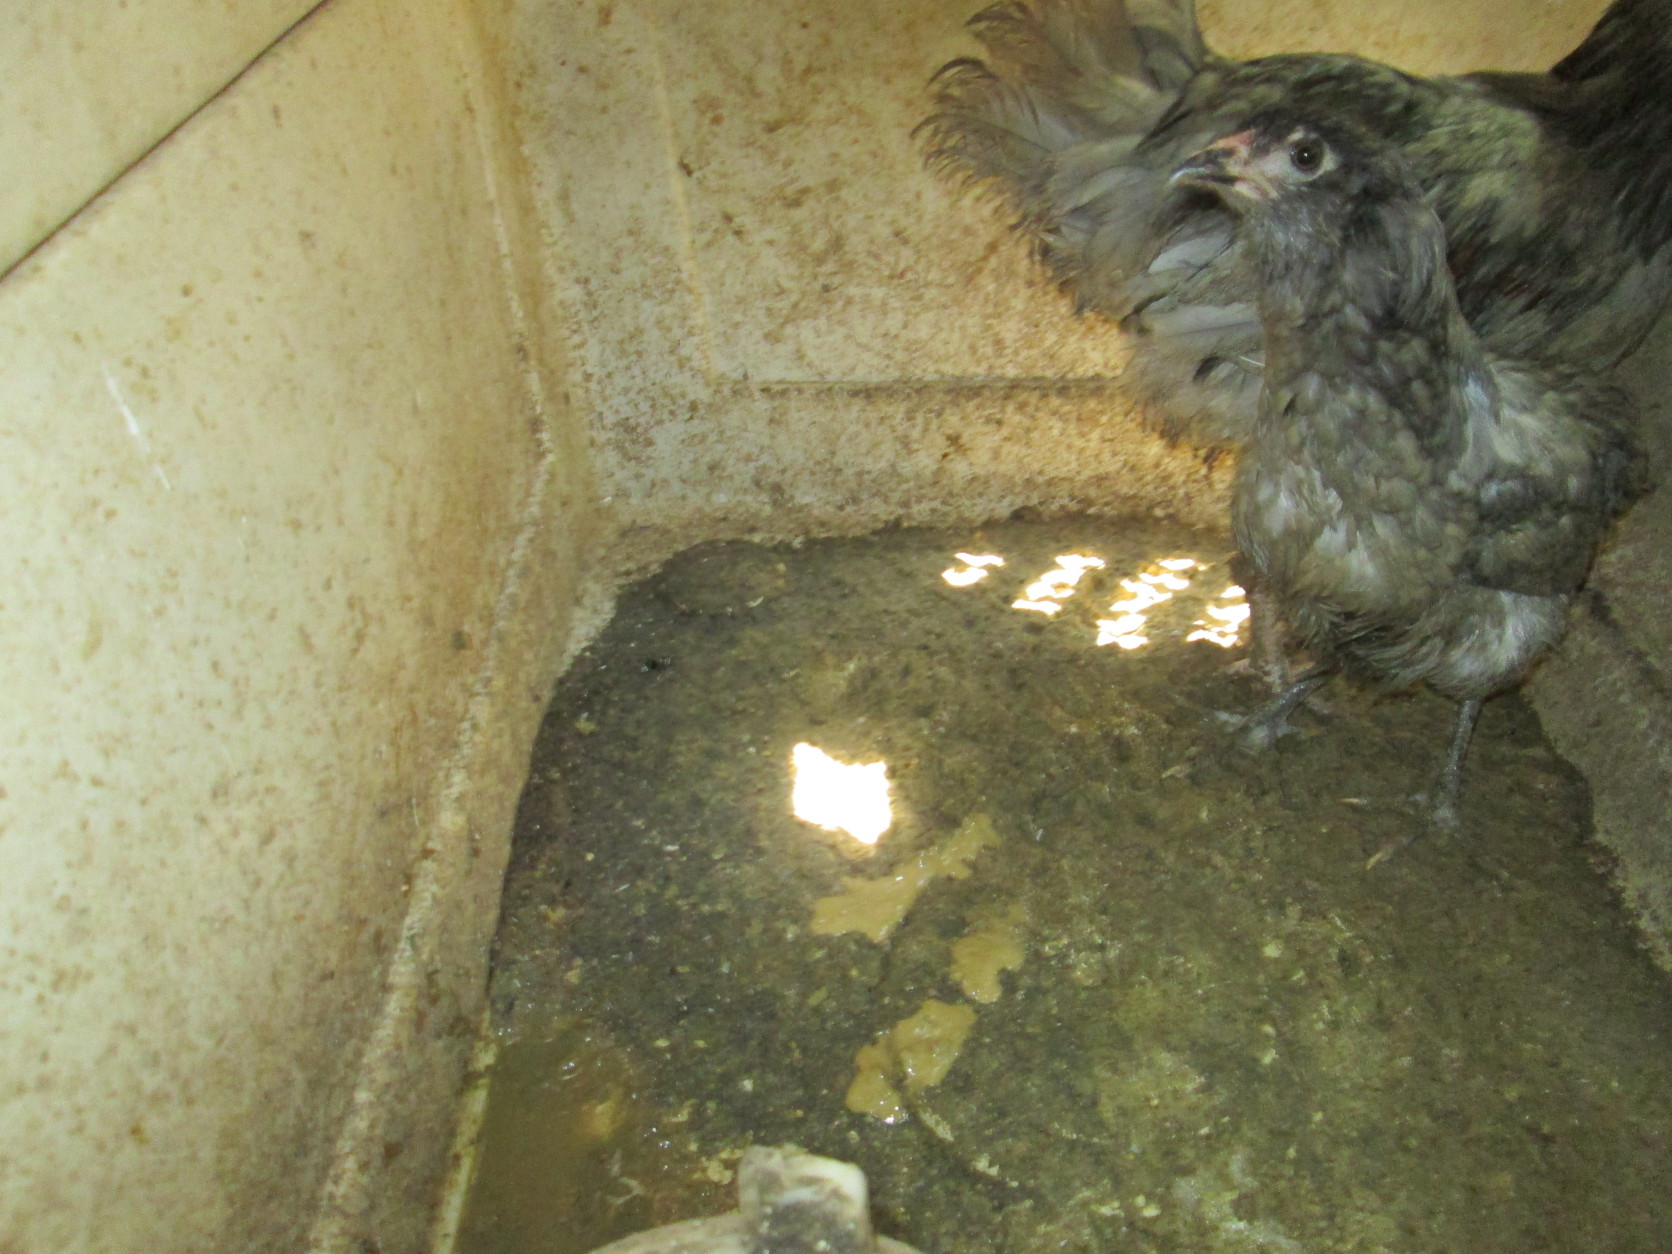 Nine chickens were found in cramped, dirty cages outside the home of Merle and Susan Uskievich, founders of the Alpha Group Animal Rescue. The couple was charged with 10 counts of animal cruelty July 27, 2017. (Montgomery County Animal Services)